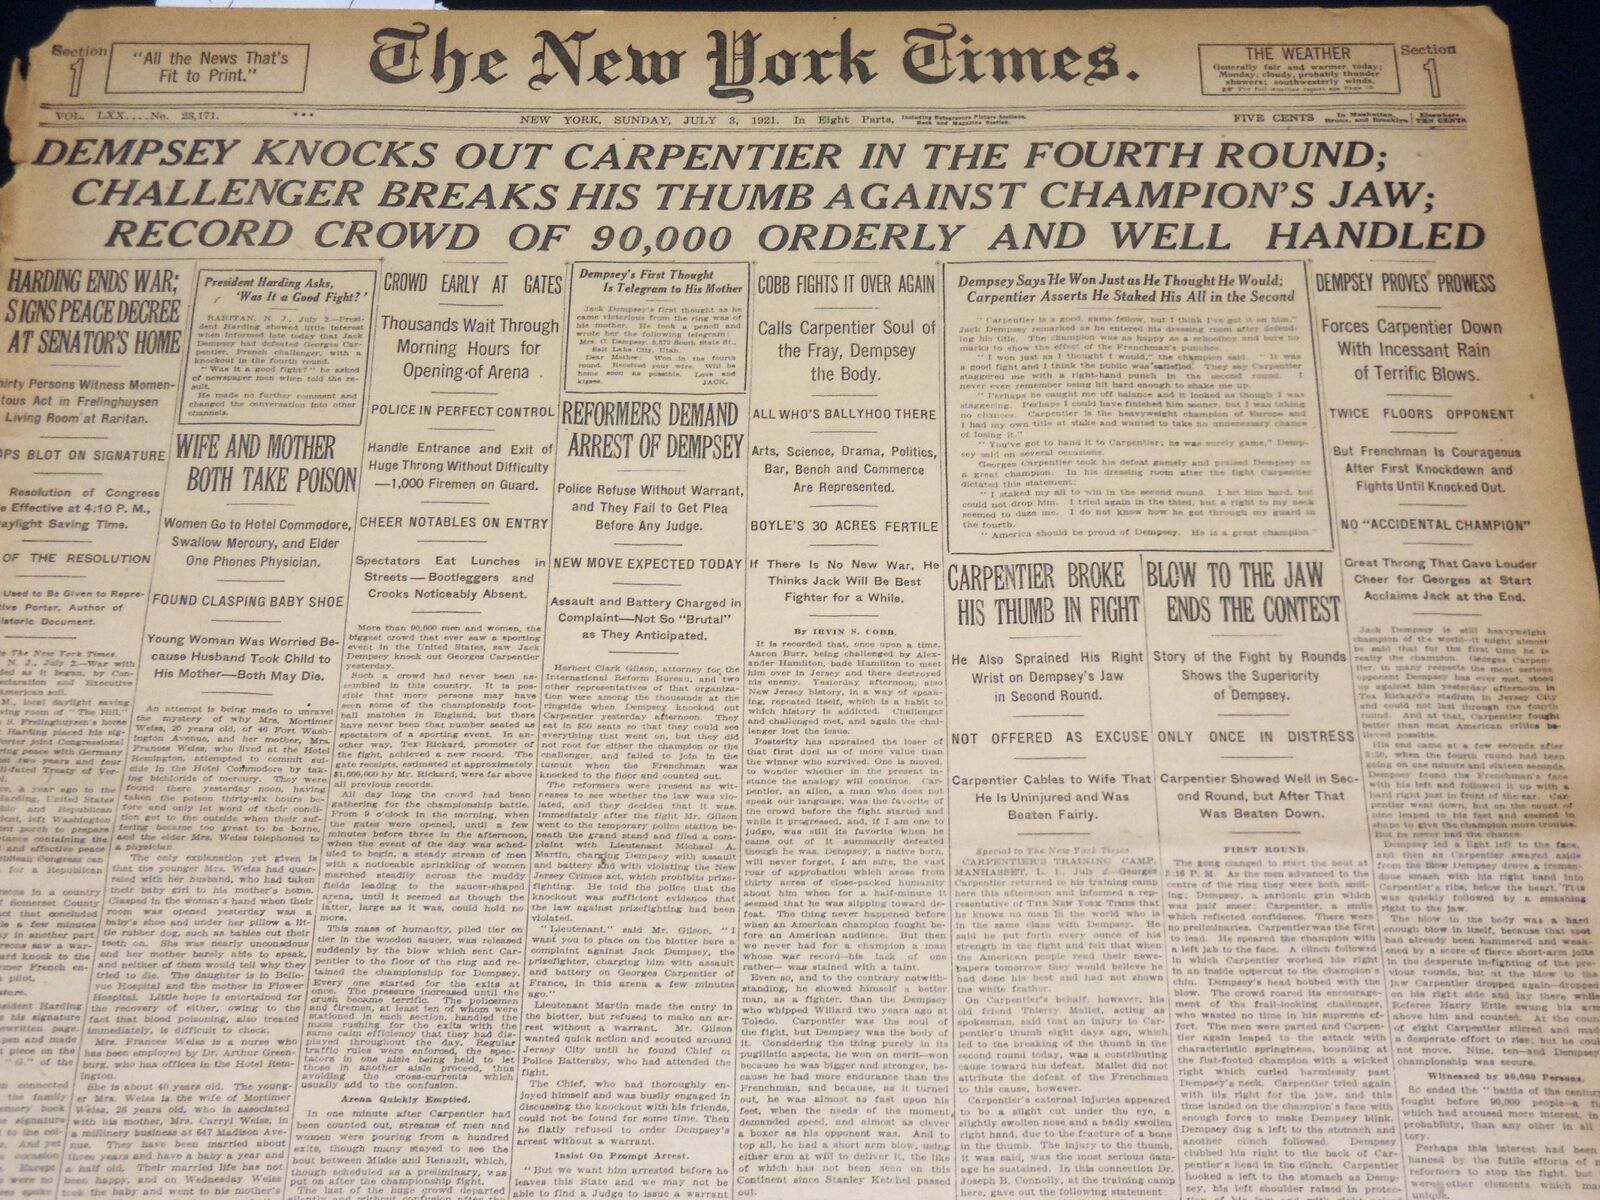 1921 JULY 3 NEW YORK TIMES - DEMPSEY KNOCKS OUT CARPENTIER IN 4TH ROUND- NT 8694